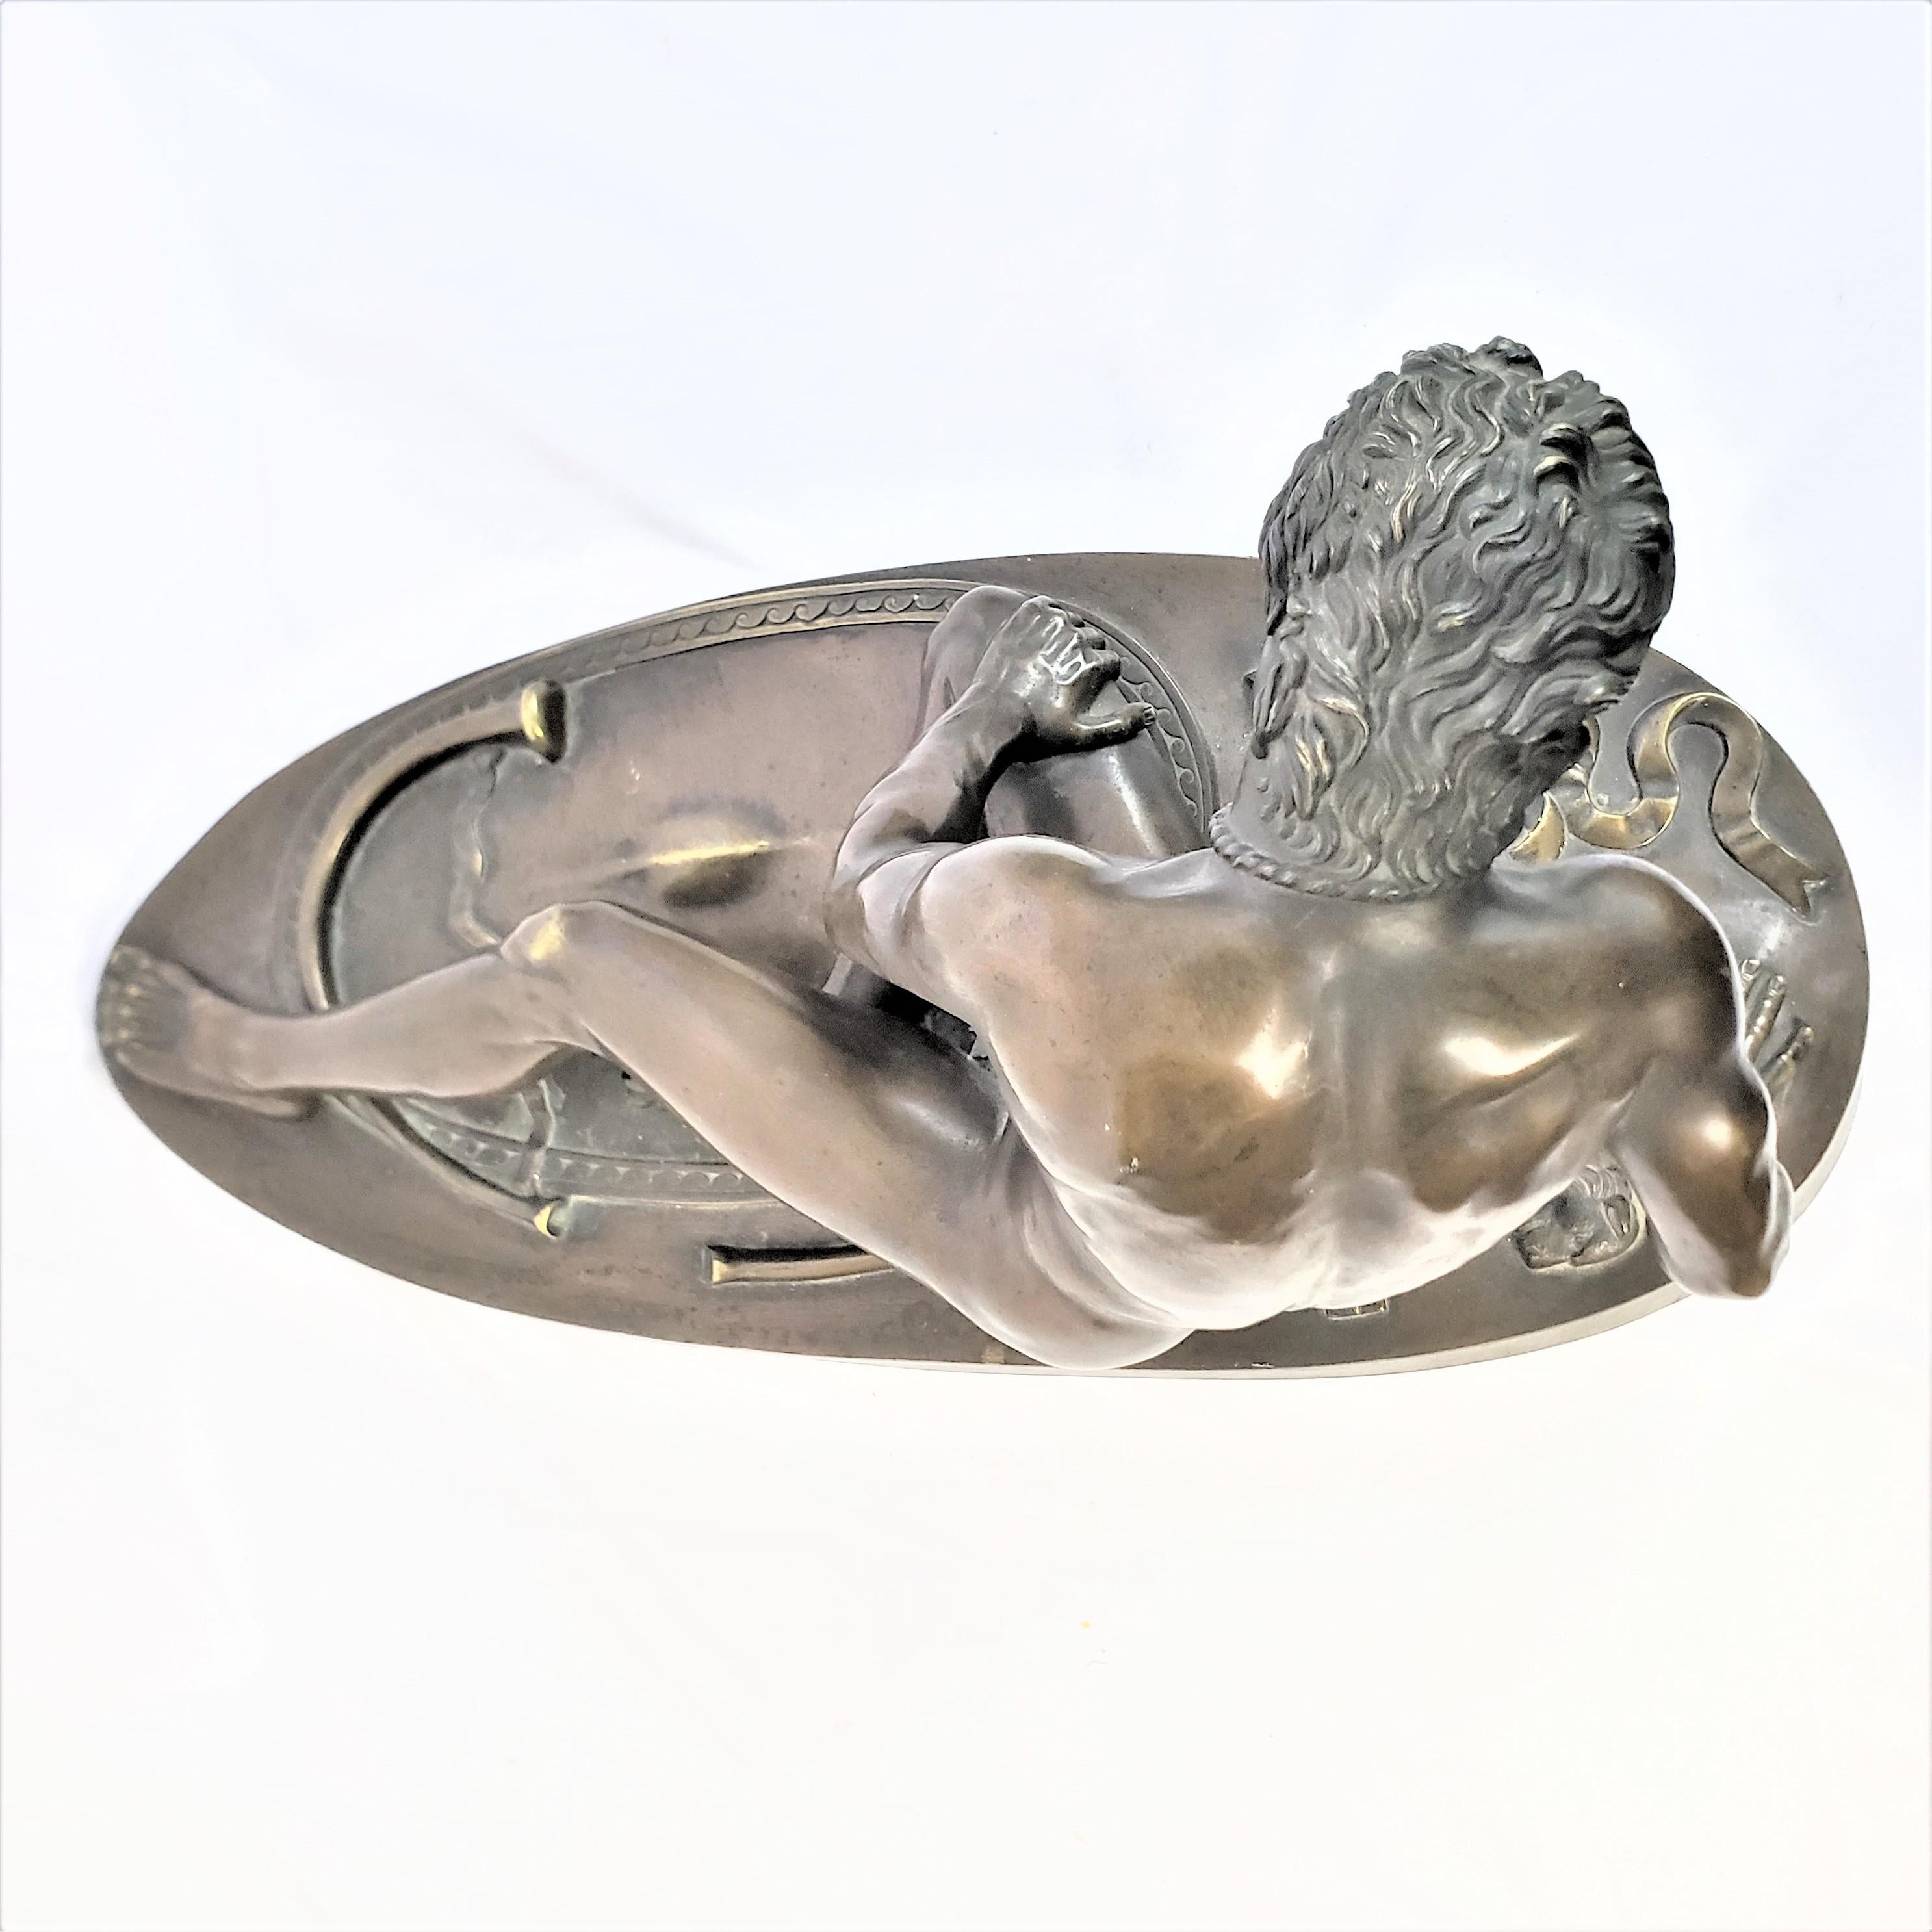 Large Antique Nelli Roma Bronze Sculpture 'The Dying Gaul' on a Plinthe Base For Sale 2